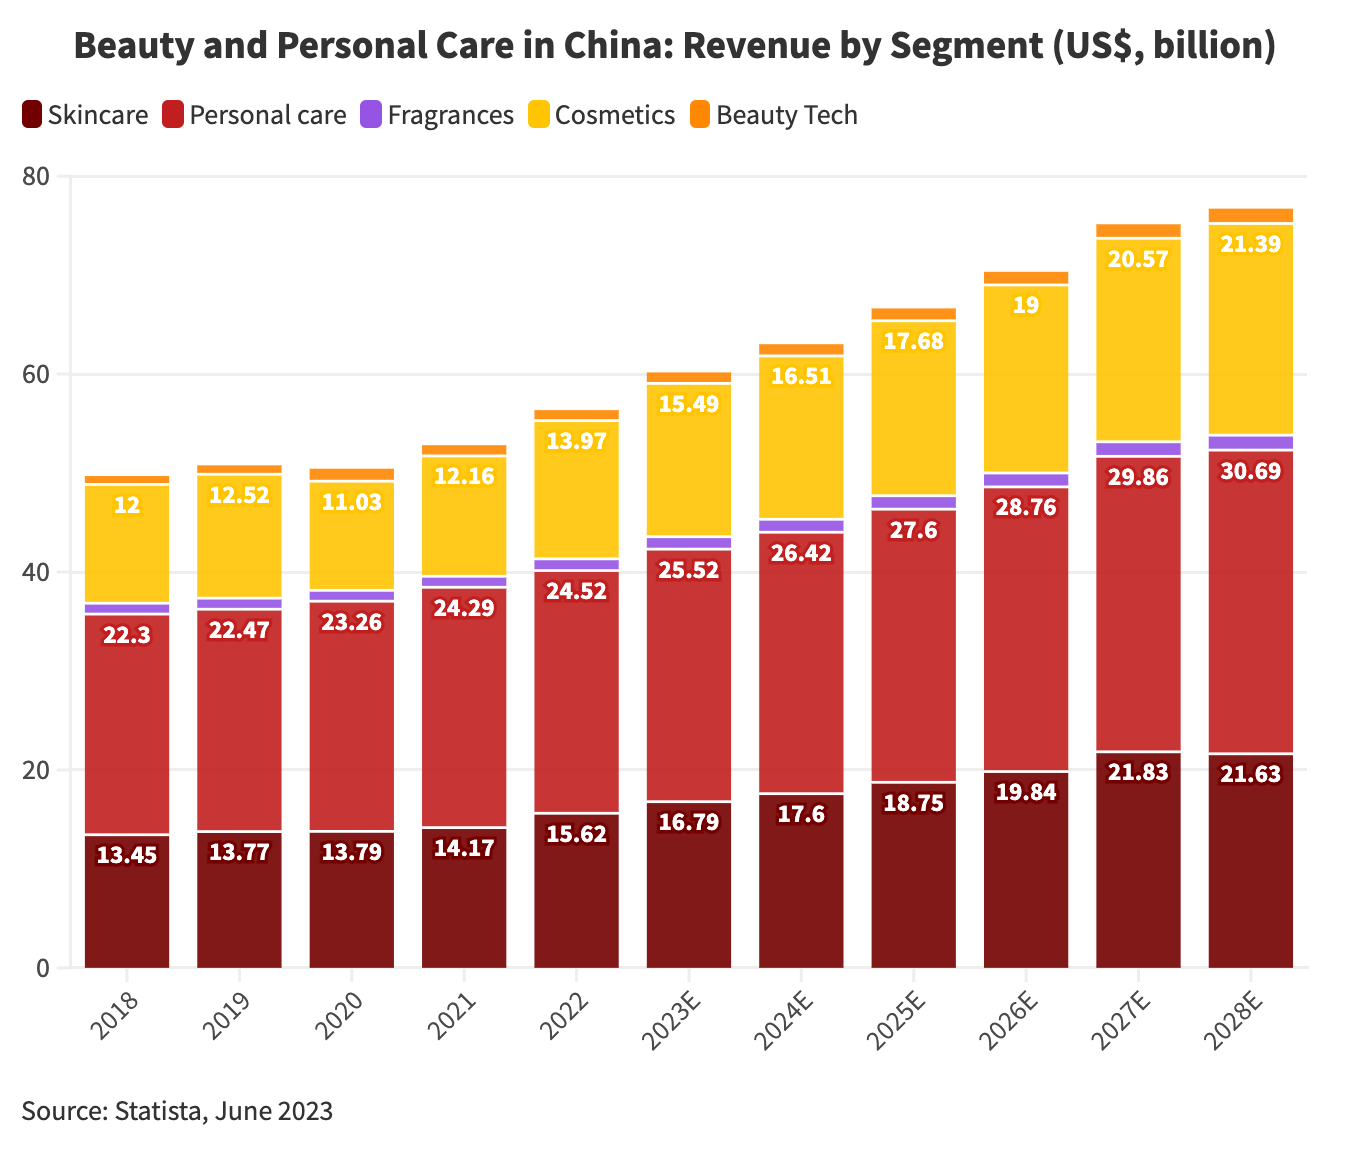 beauty-and-personal-care-in-china-revenue-by-segment-usd@2x